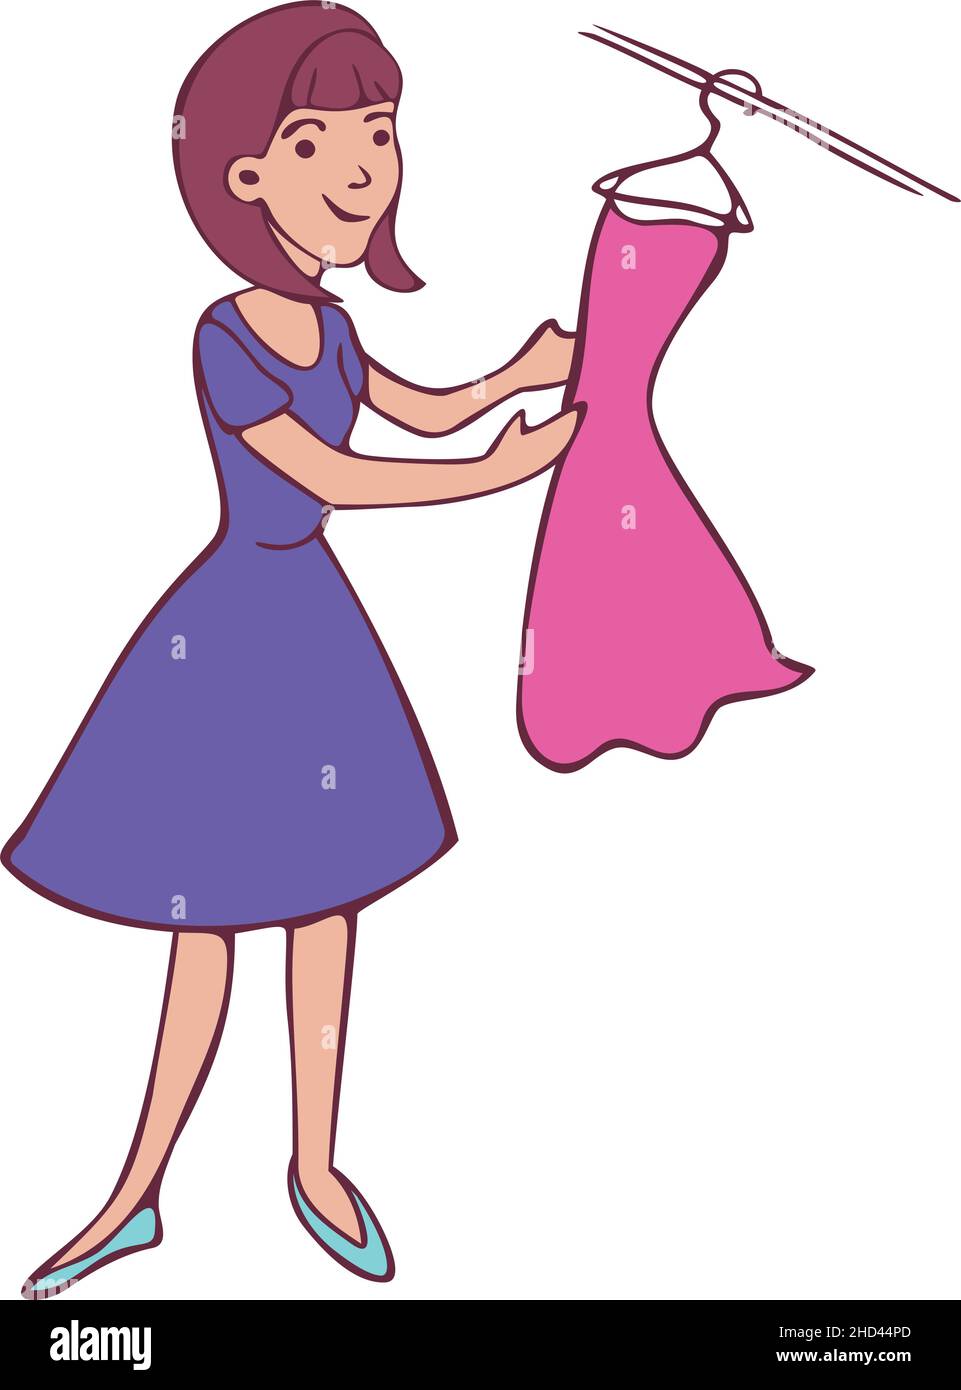 Vector illustration of woman with dress on hanger. Colored and depicted by a line. Stock Vector